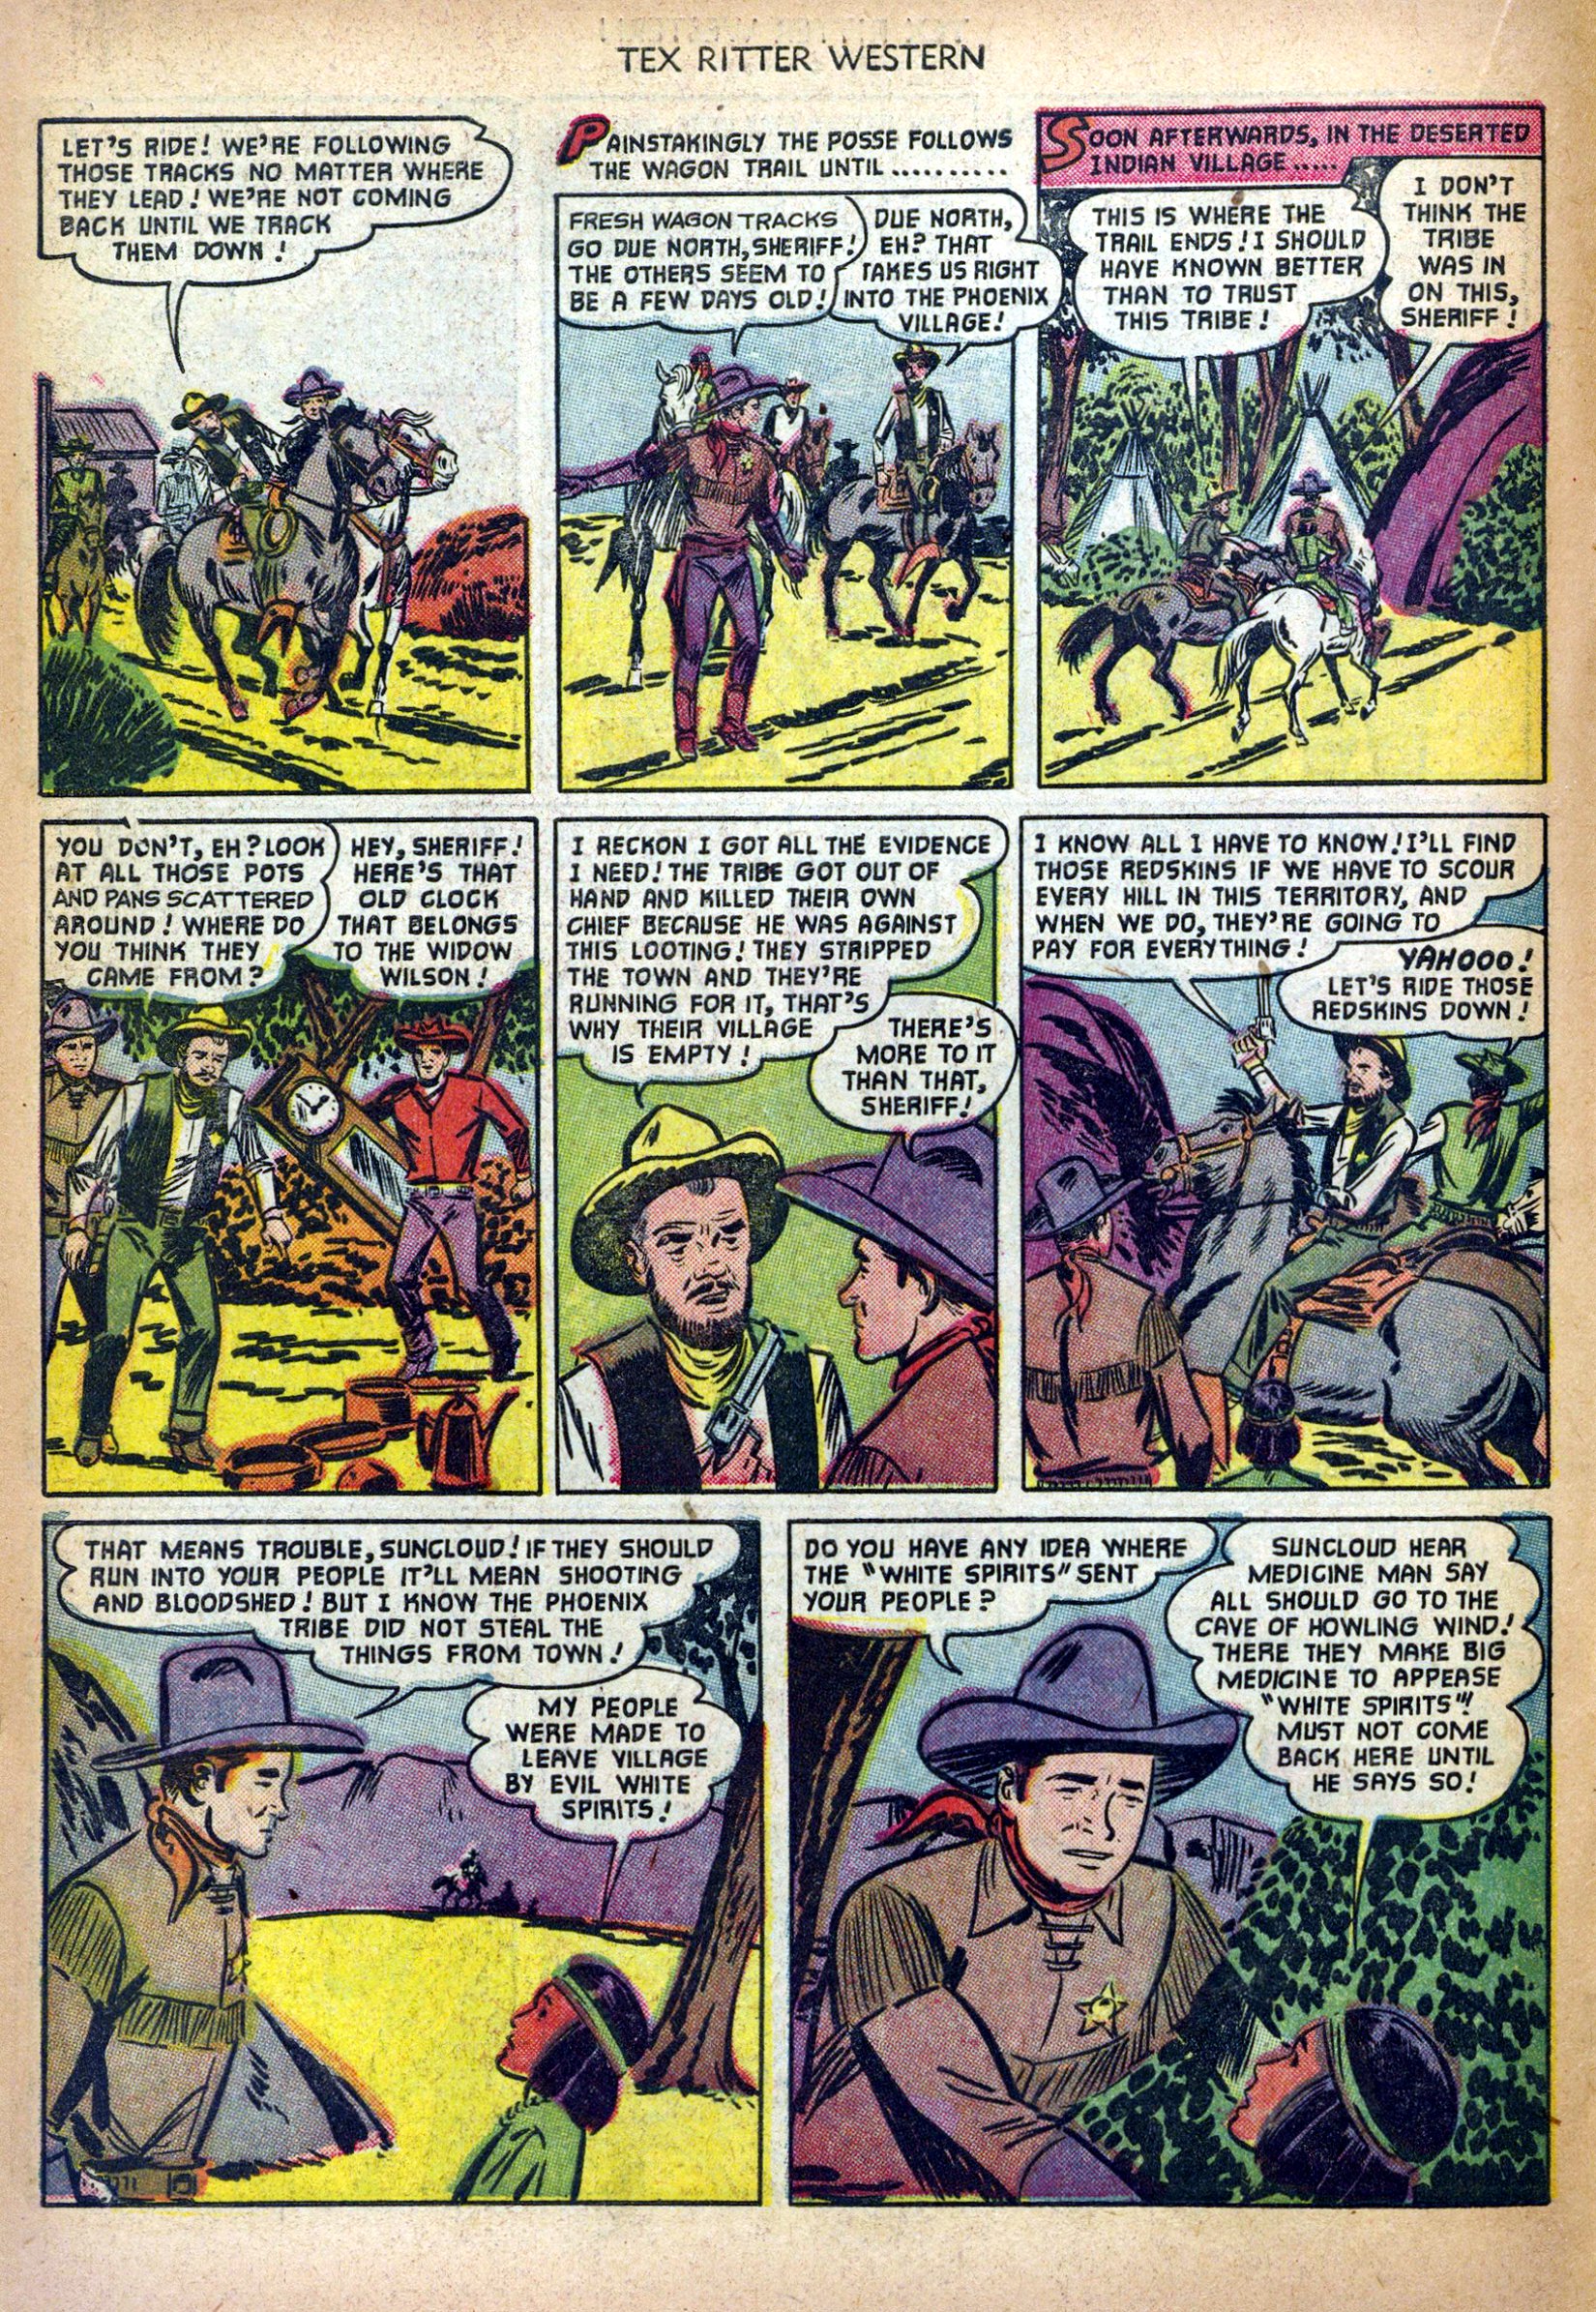 Read online Tex Ritter Western comic -  Issue #10 - 18